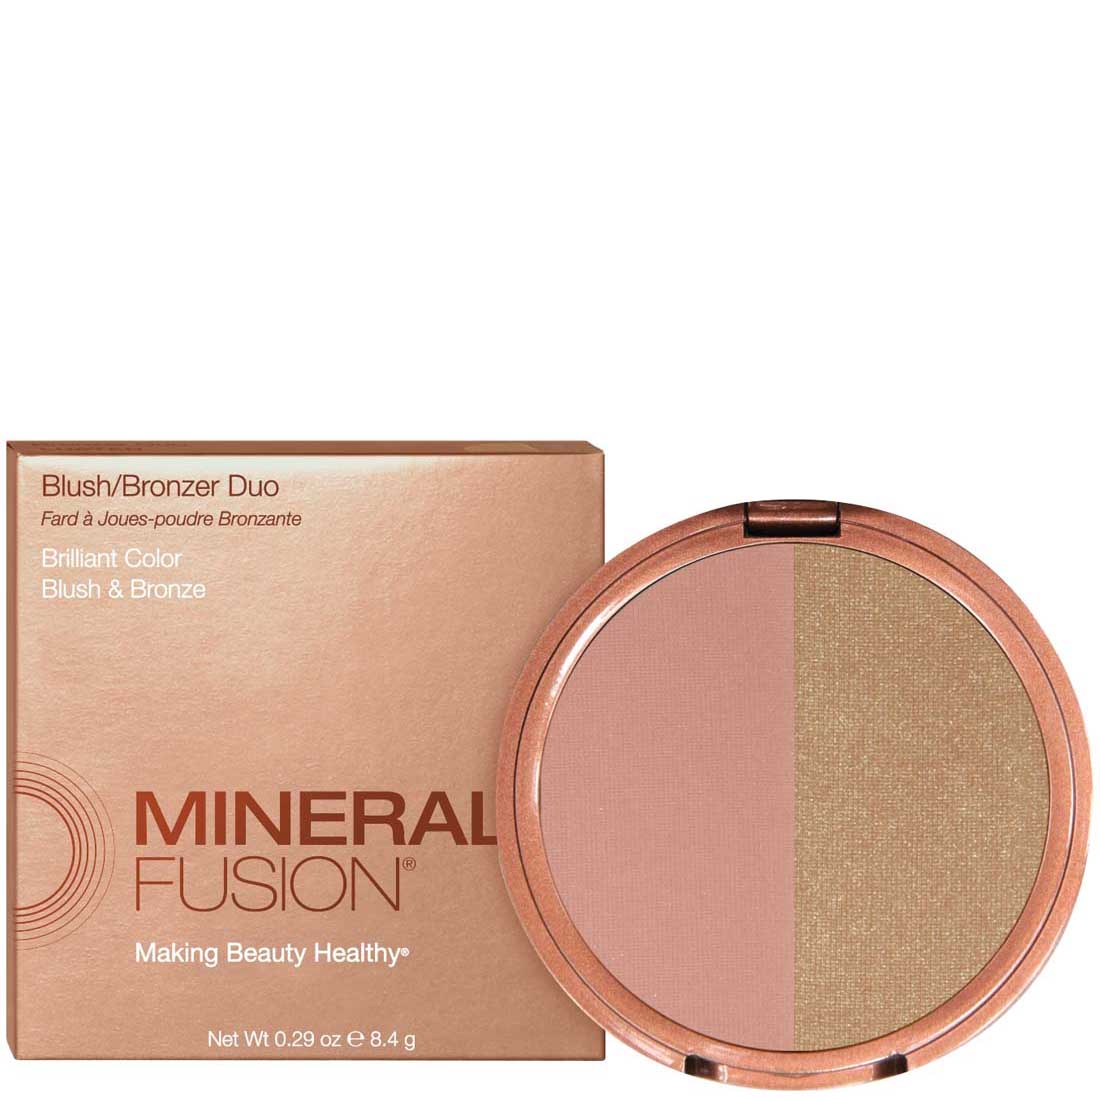 Mineral Fusion Blush/Bronzer Duo, 8.2g, Clearance 35% Off, Final Sale